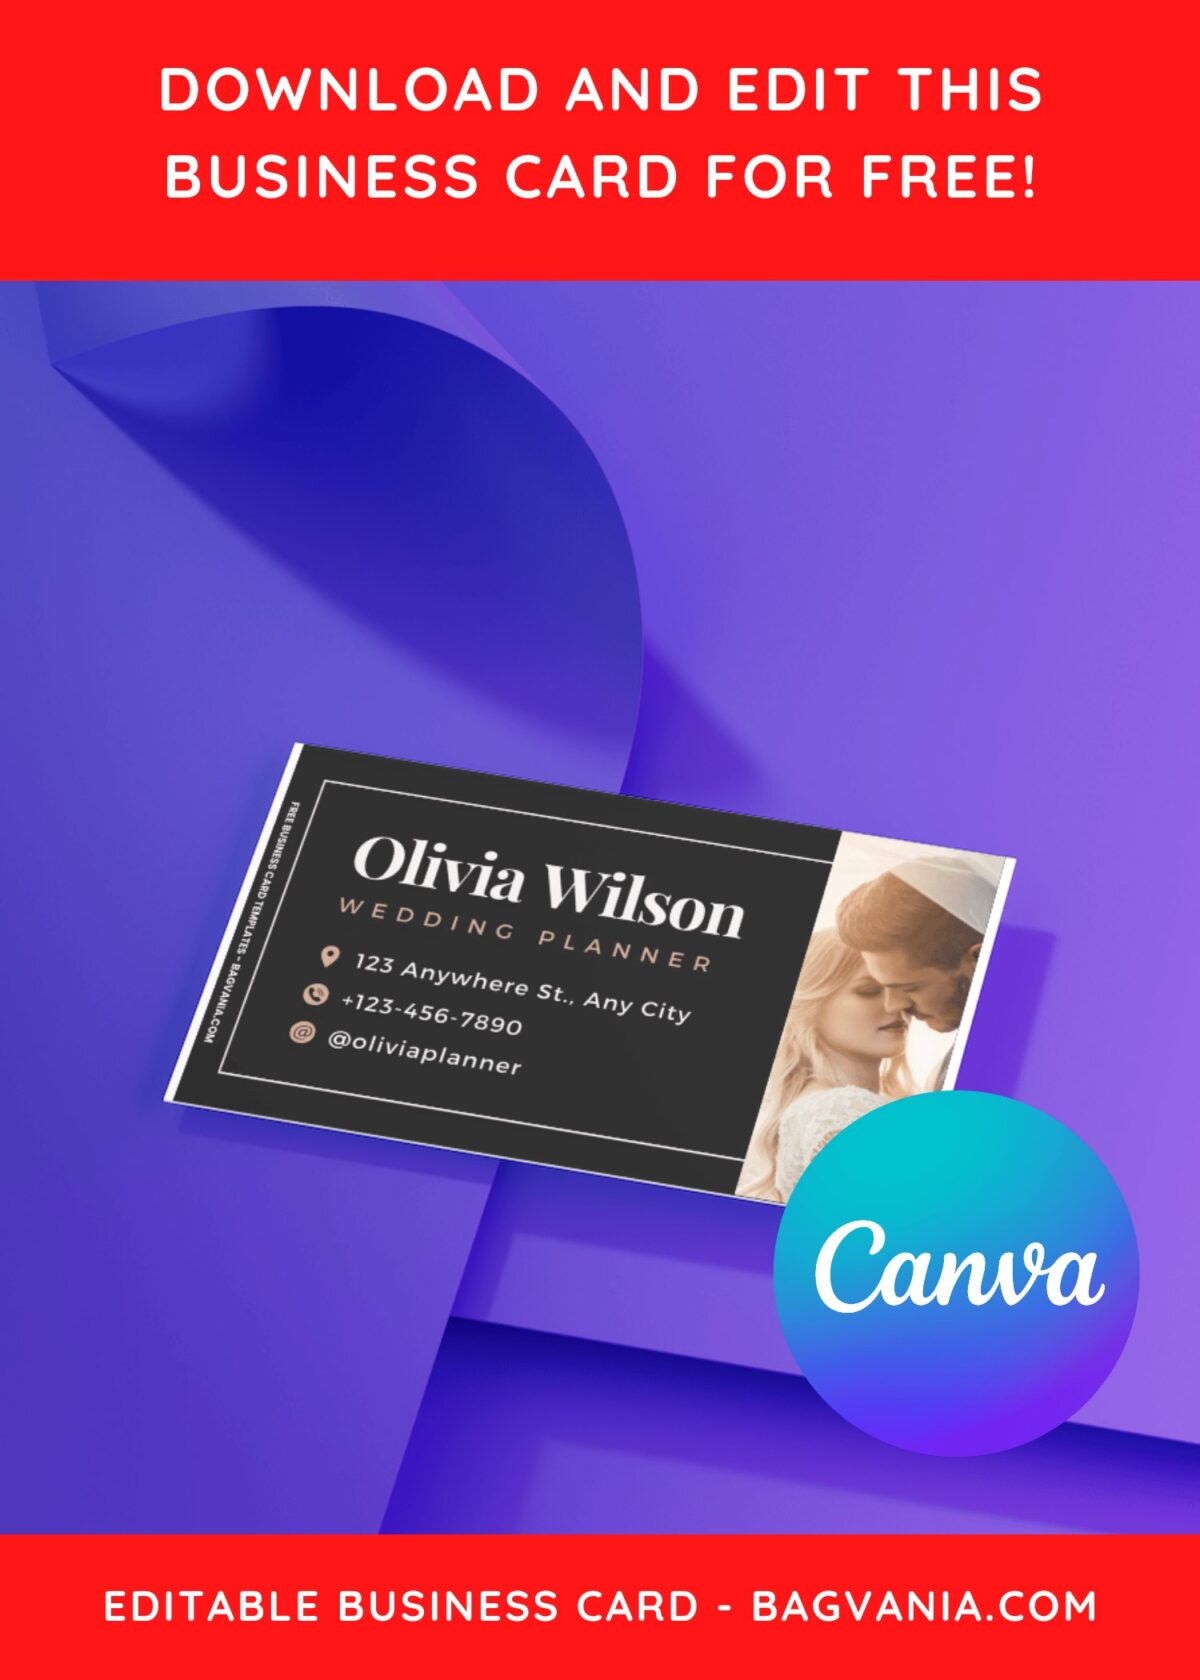 10+ Floral Canva Business Card Templates For Wedding Planner I